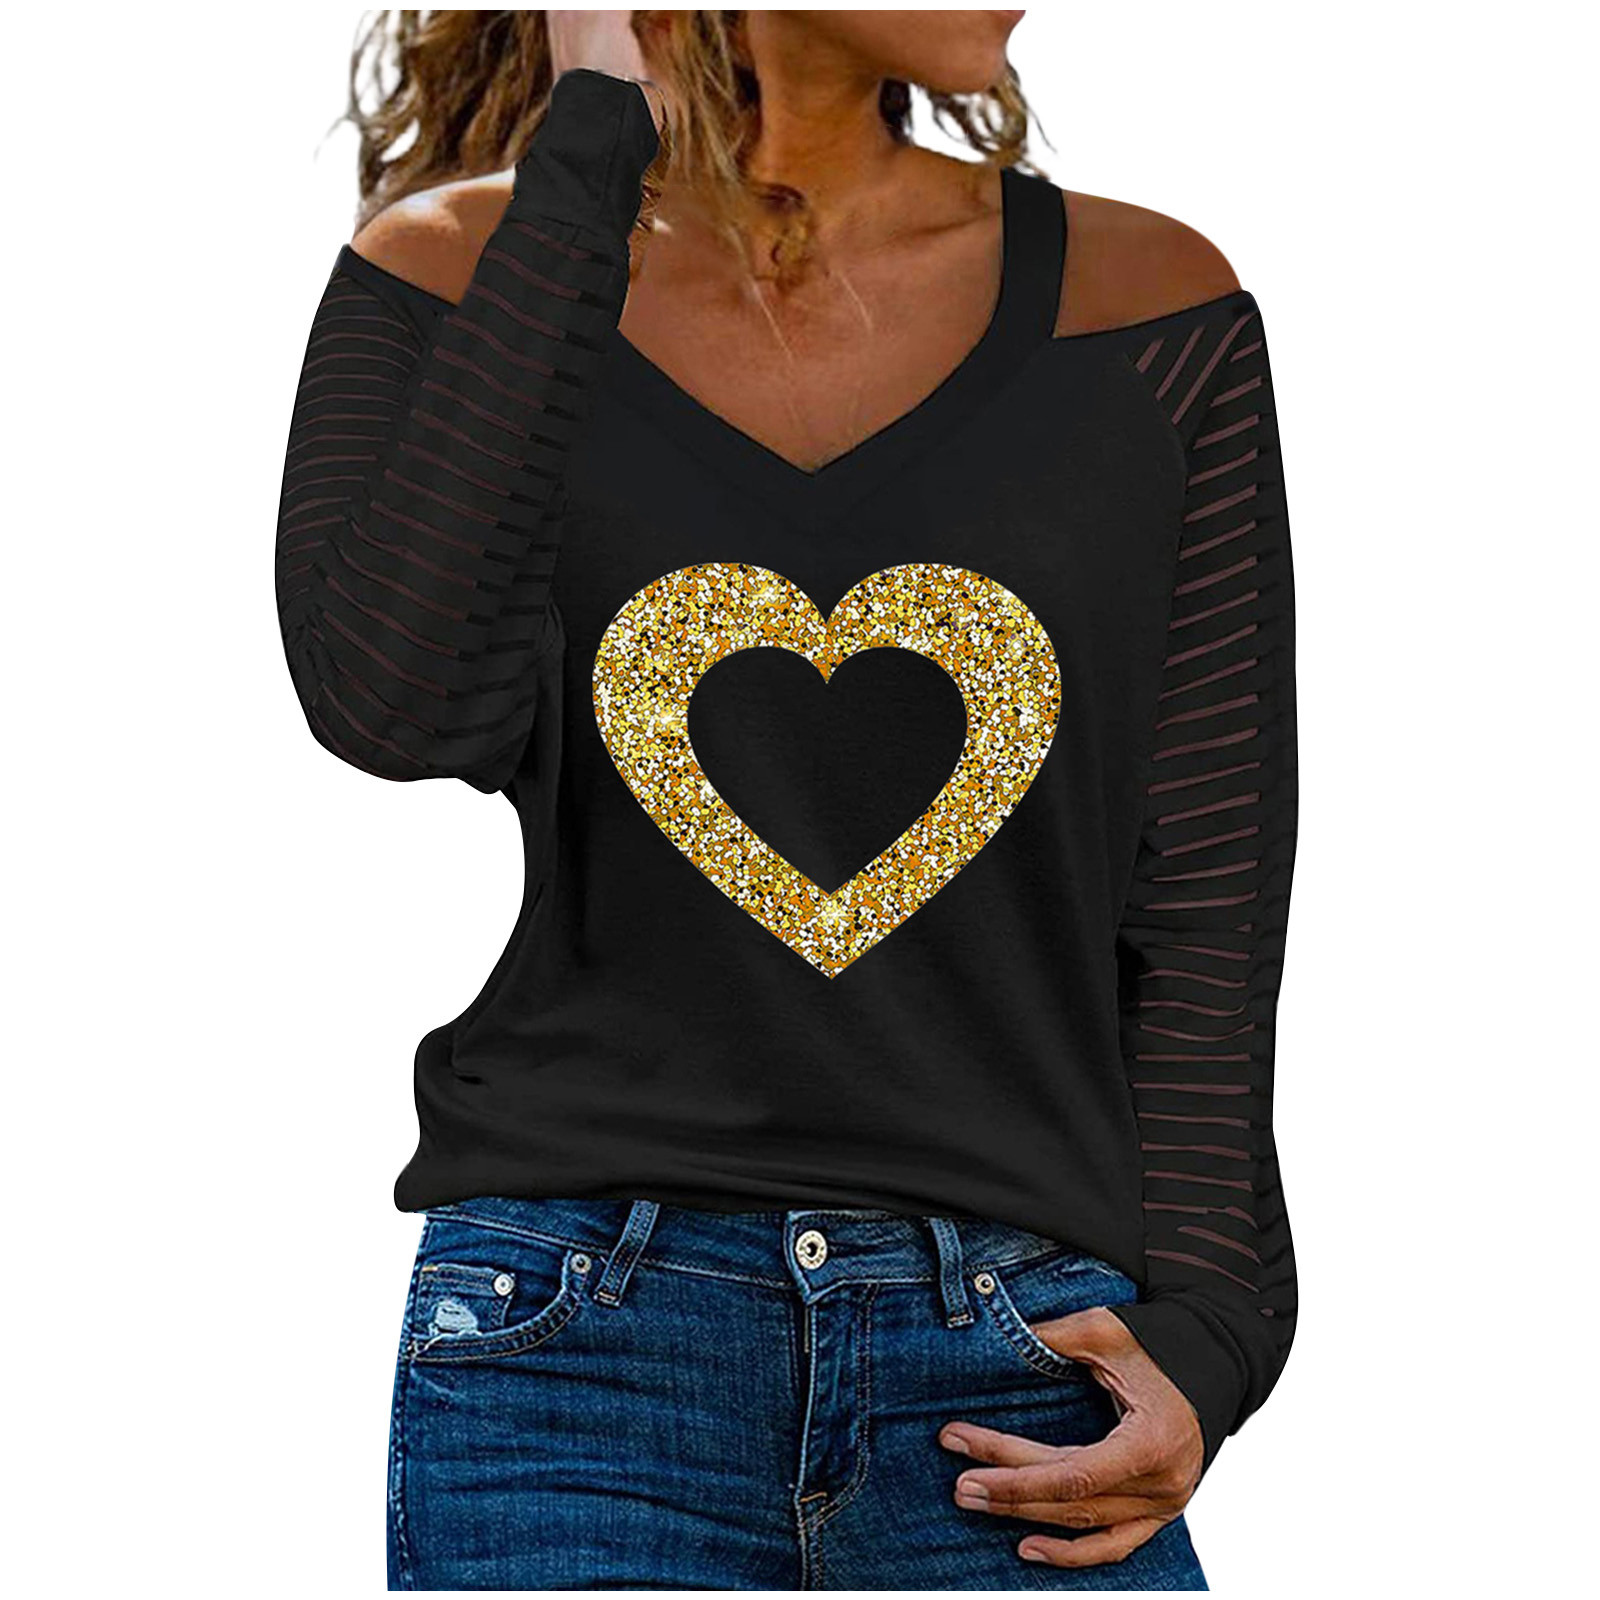 Women Sparkly Heart Shirts Fashion Sweetheart Collar Cold Shoulder Stripe Long Sleeves T-Shirt Pullover Tunic Tops - image 1 of 4